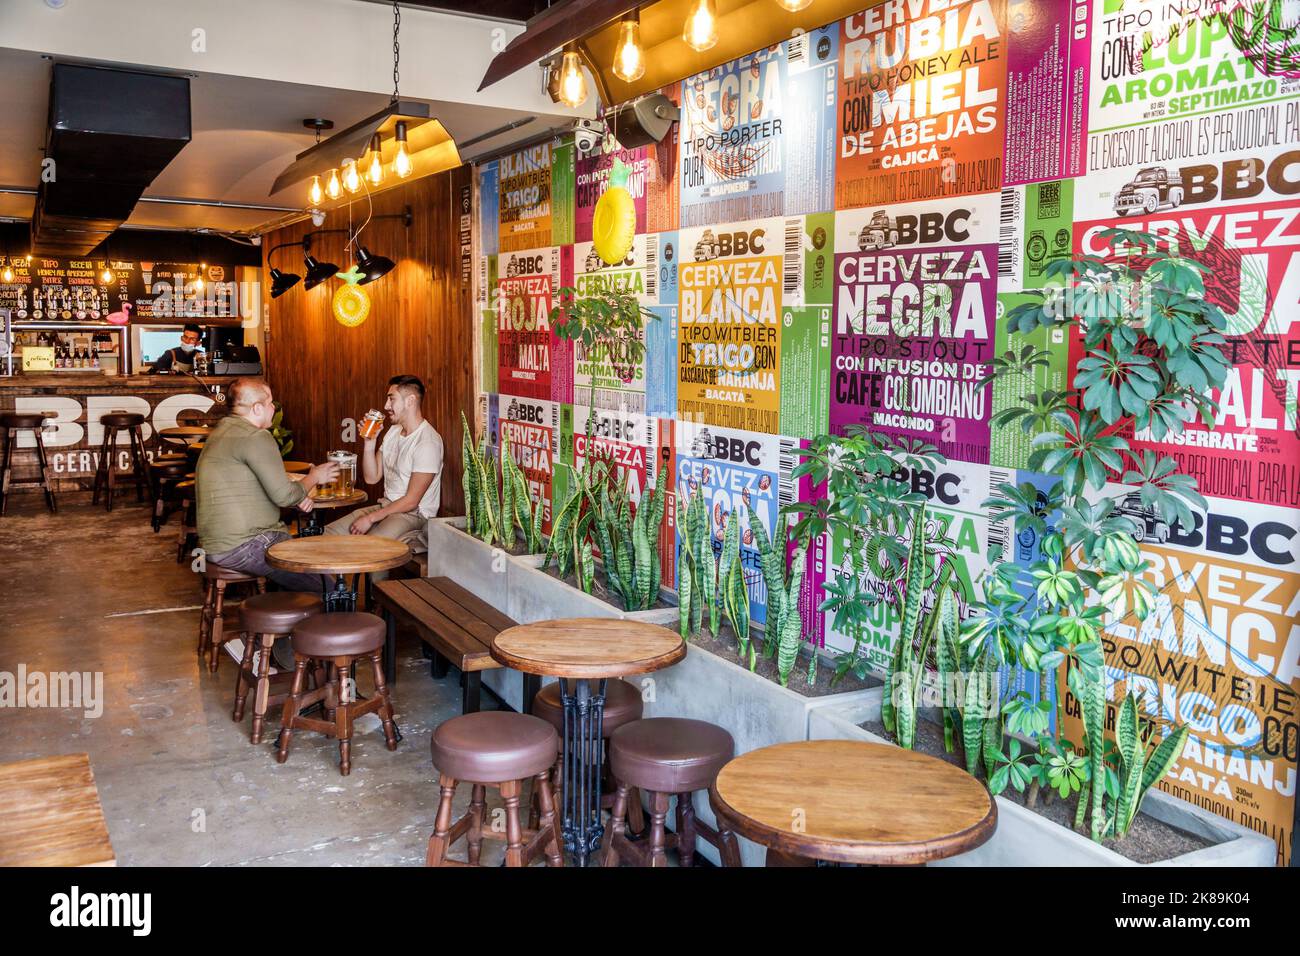 Bogota Colombia,Chapinero Norte Avenida Carrera 7,BBC Cerveceria beer brewery drinking,restaurant restaurants dine dining eating out casual cafe cafes Stock Photo